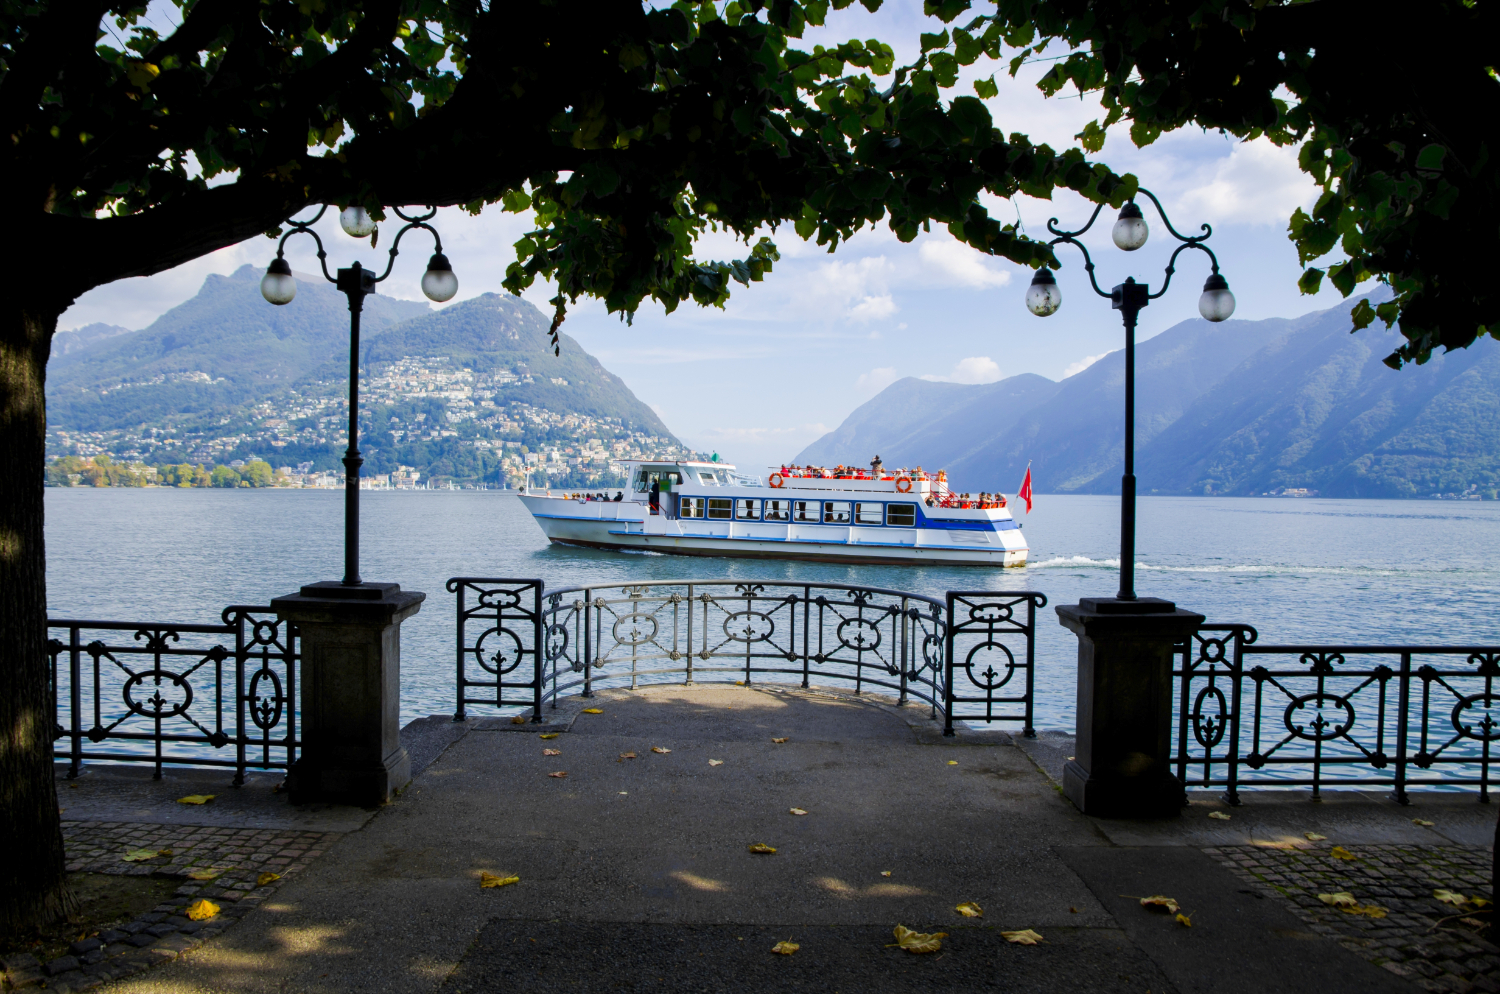 The Lugano lake offers several stunning experiences